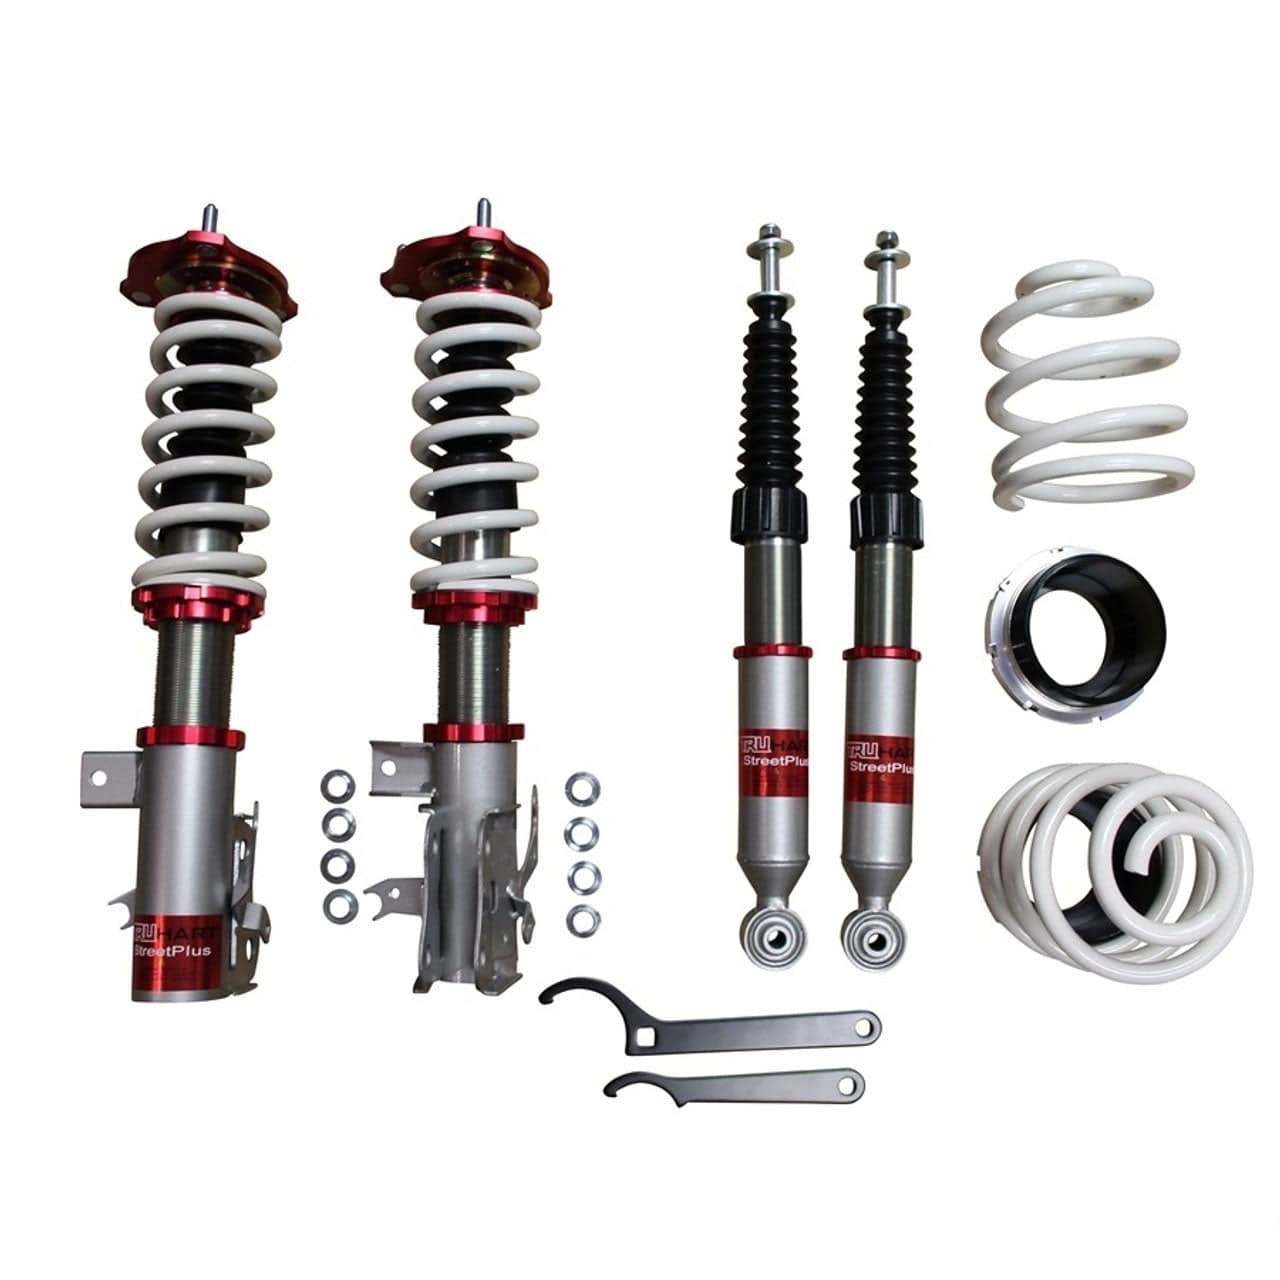 TruHart StreetPlus Coilovers for 2013-2015 Acura ILX TH-H805-1